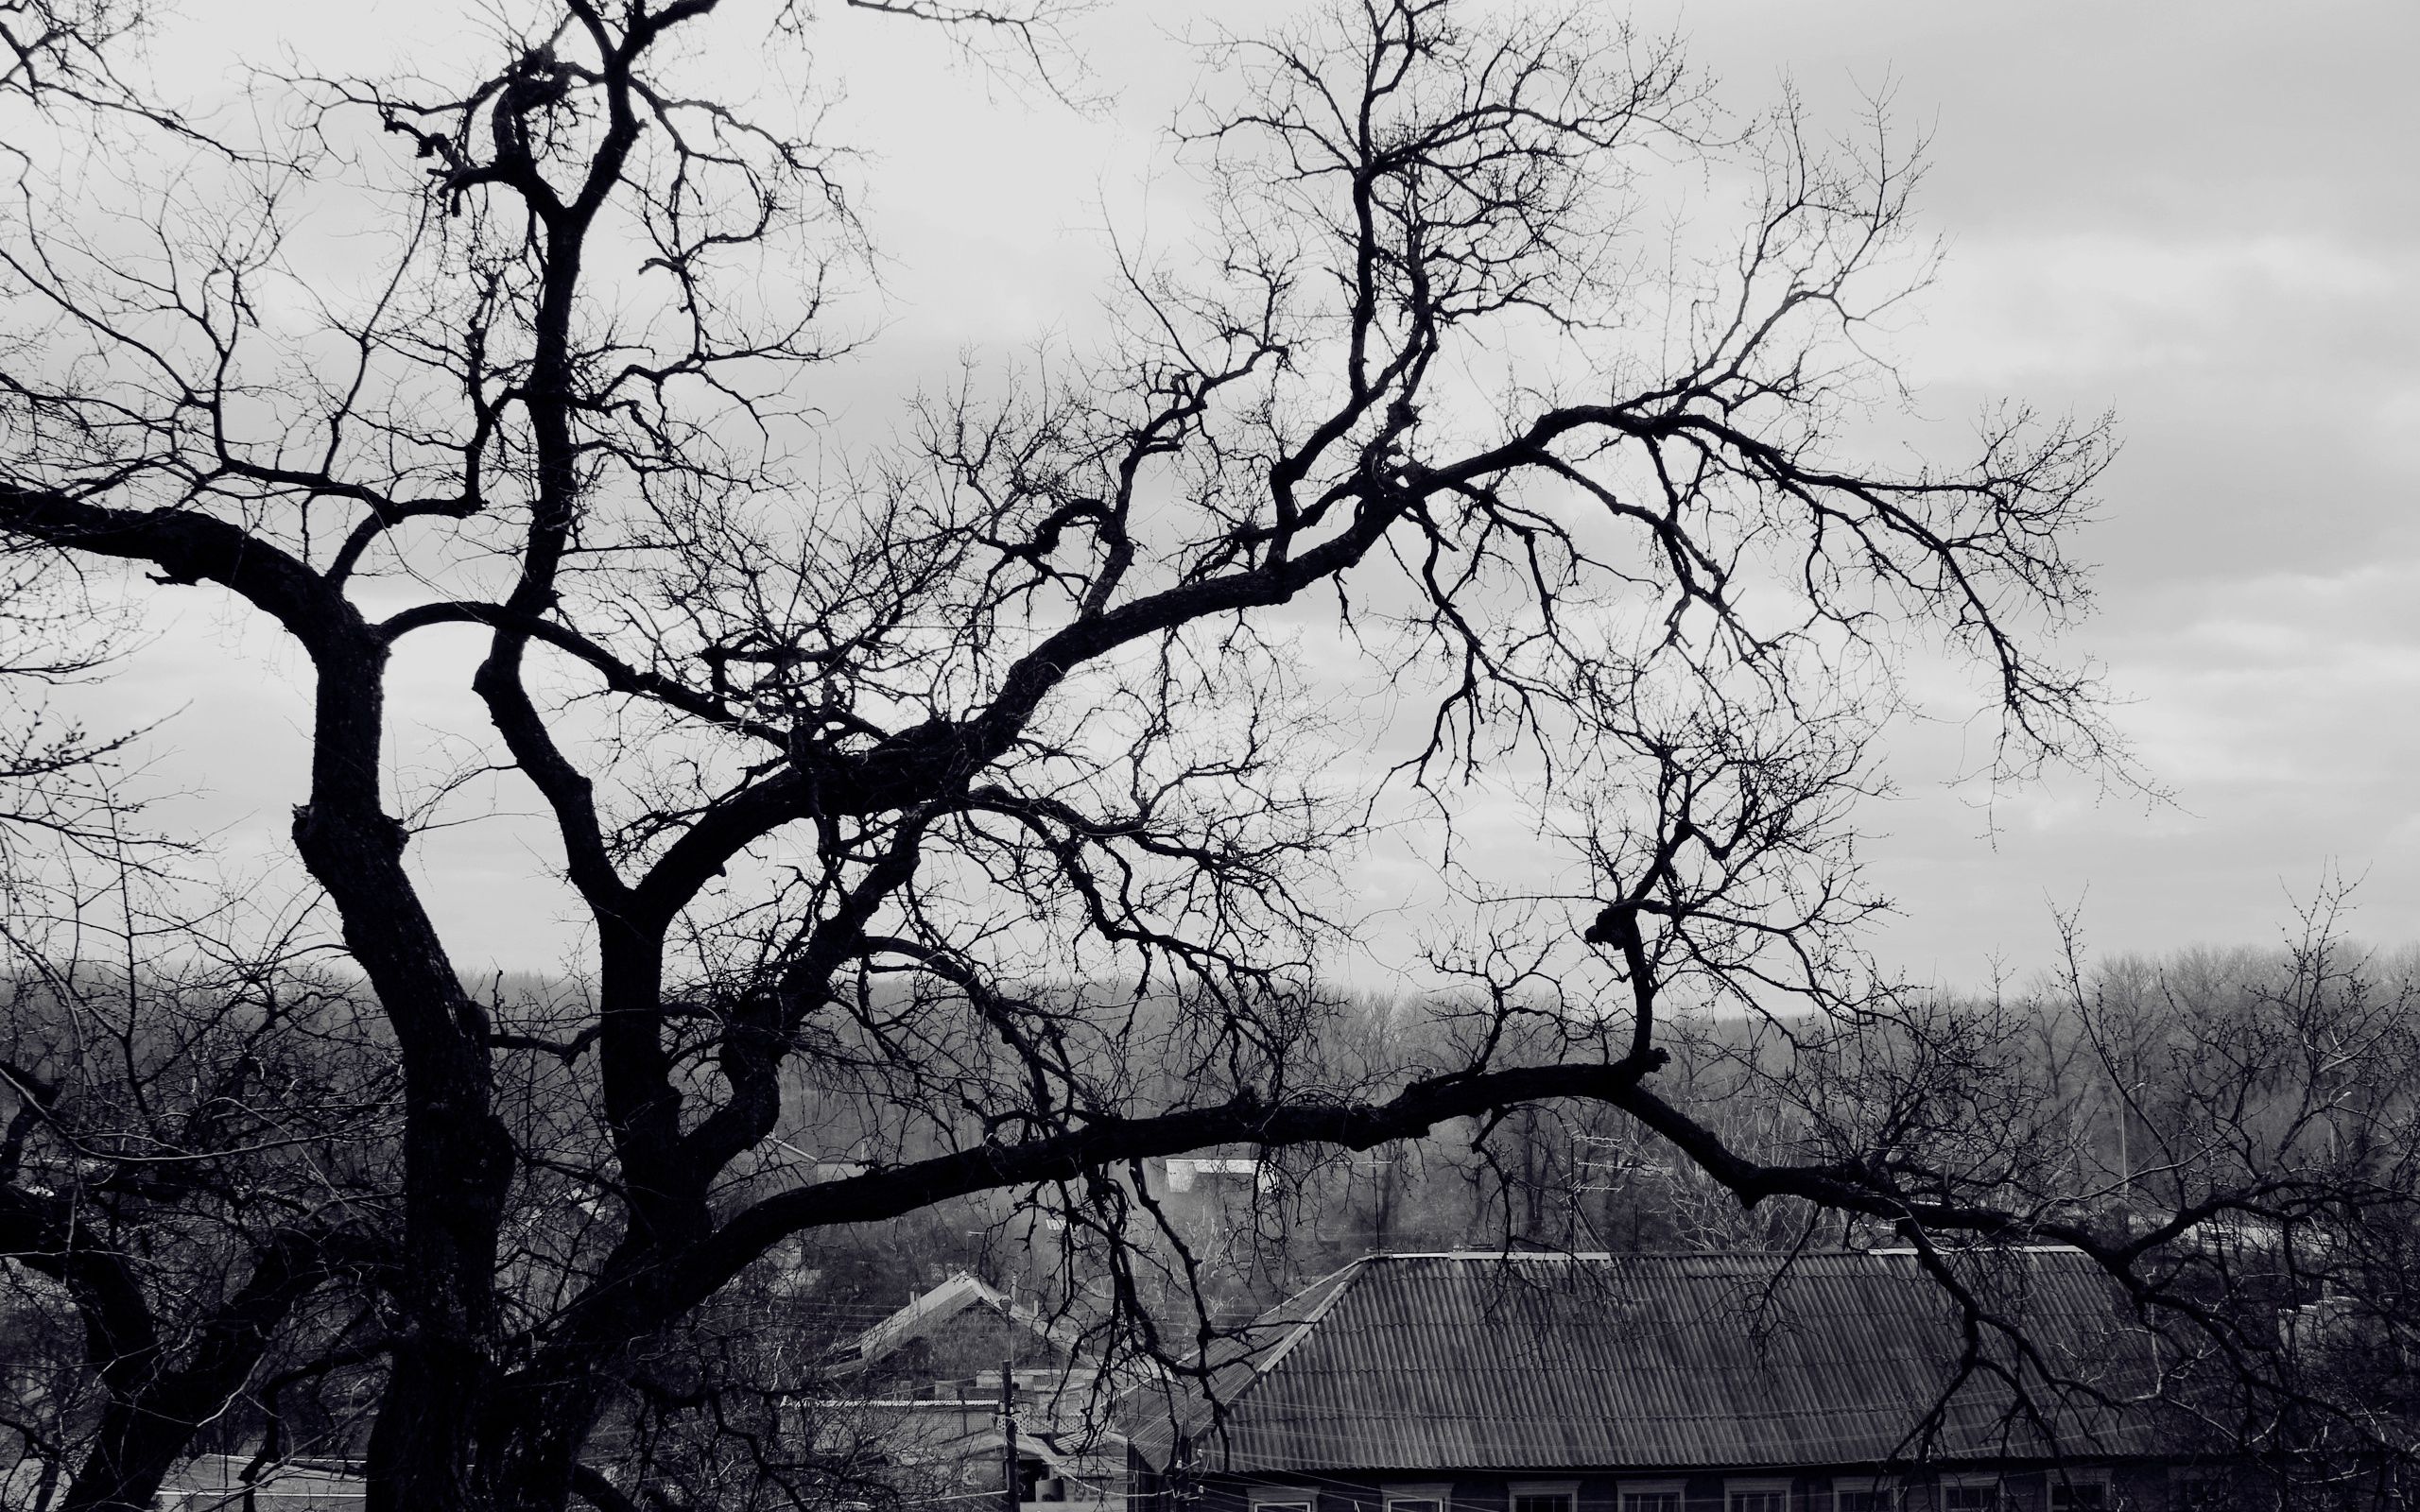 creepy, black and white, wood, nature, tree, branches, branch, roof, gloomy